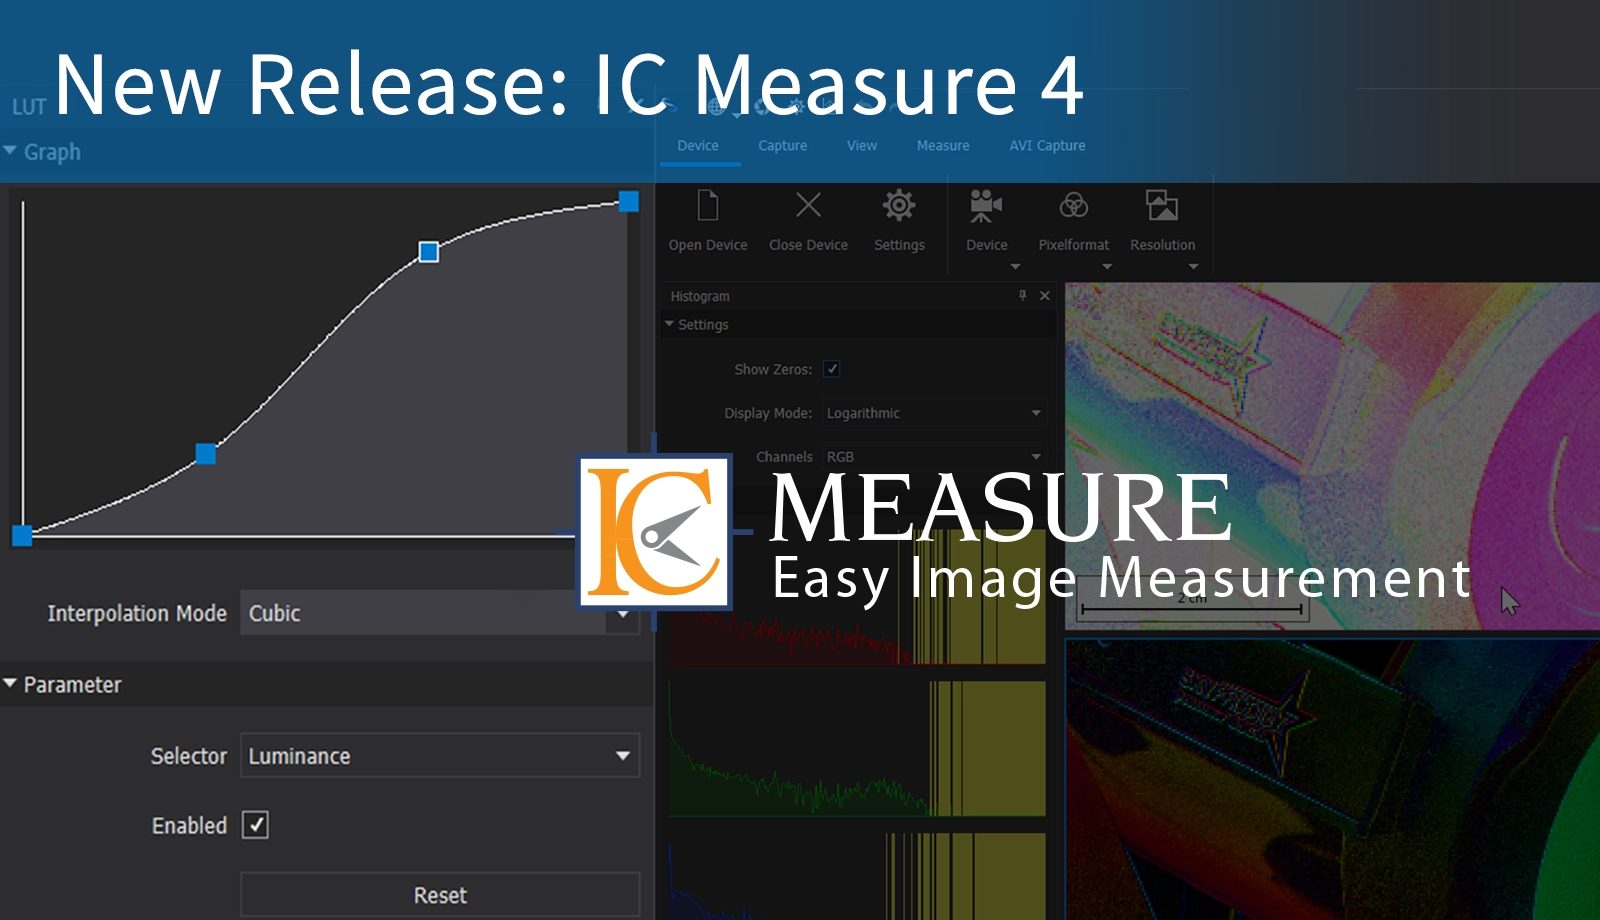 IC Measure 4: The updated software is designed for seamless industrial camera integration and advanced image processing.